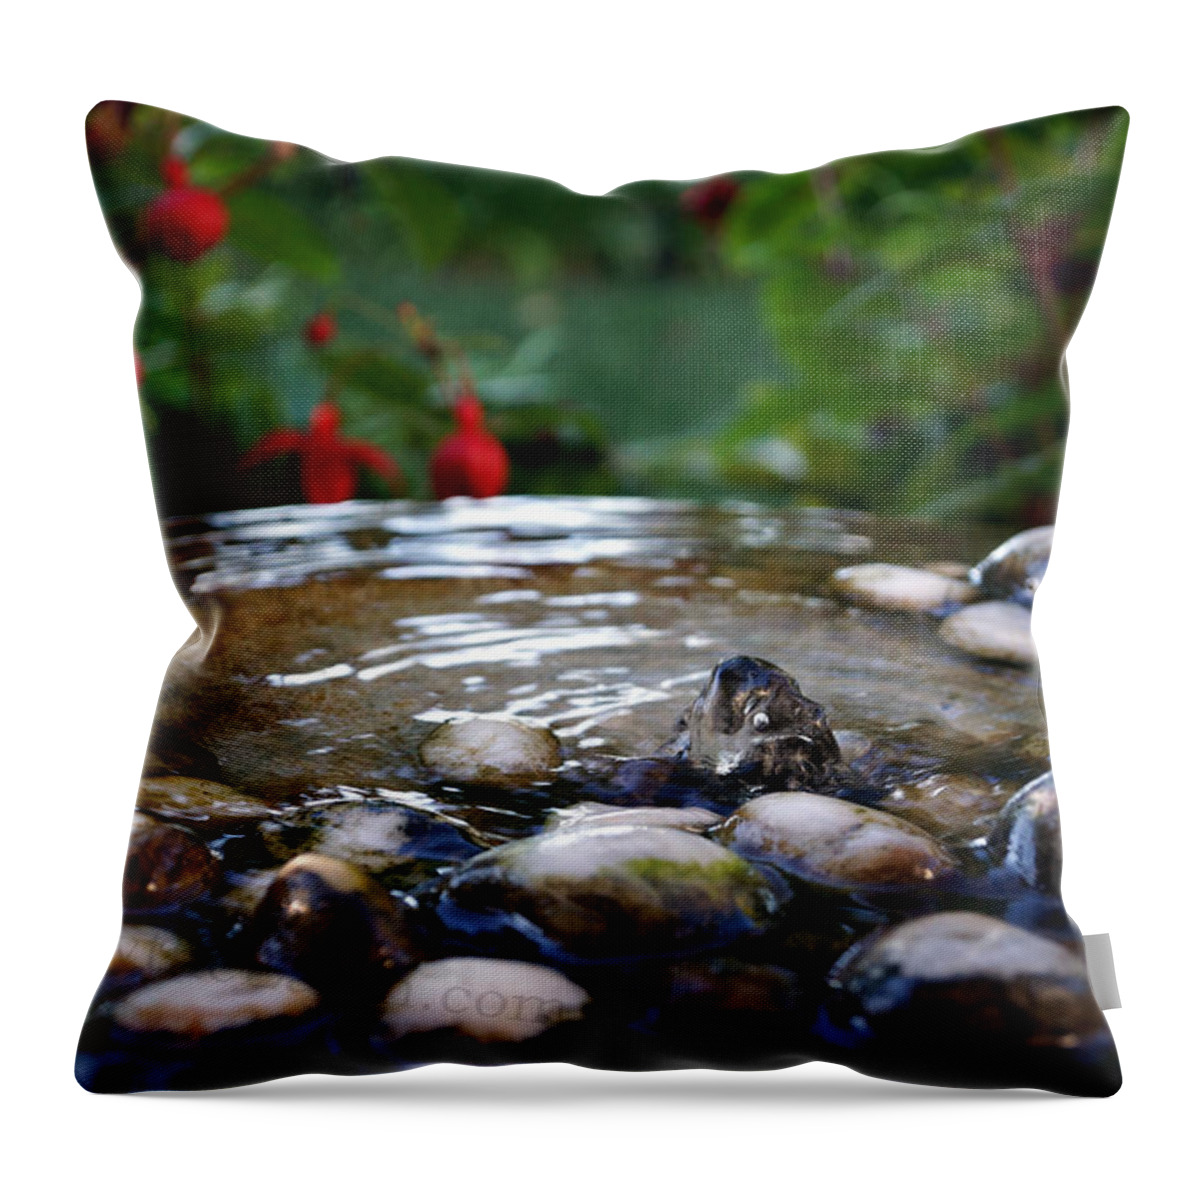  Throw Pillow featuring the photograph Serenity by Todd Hummel